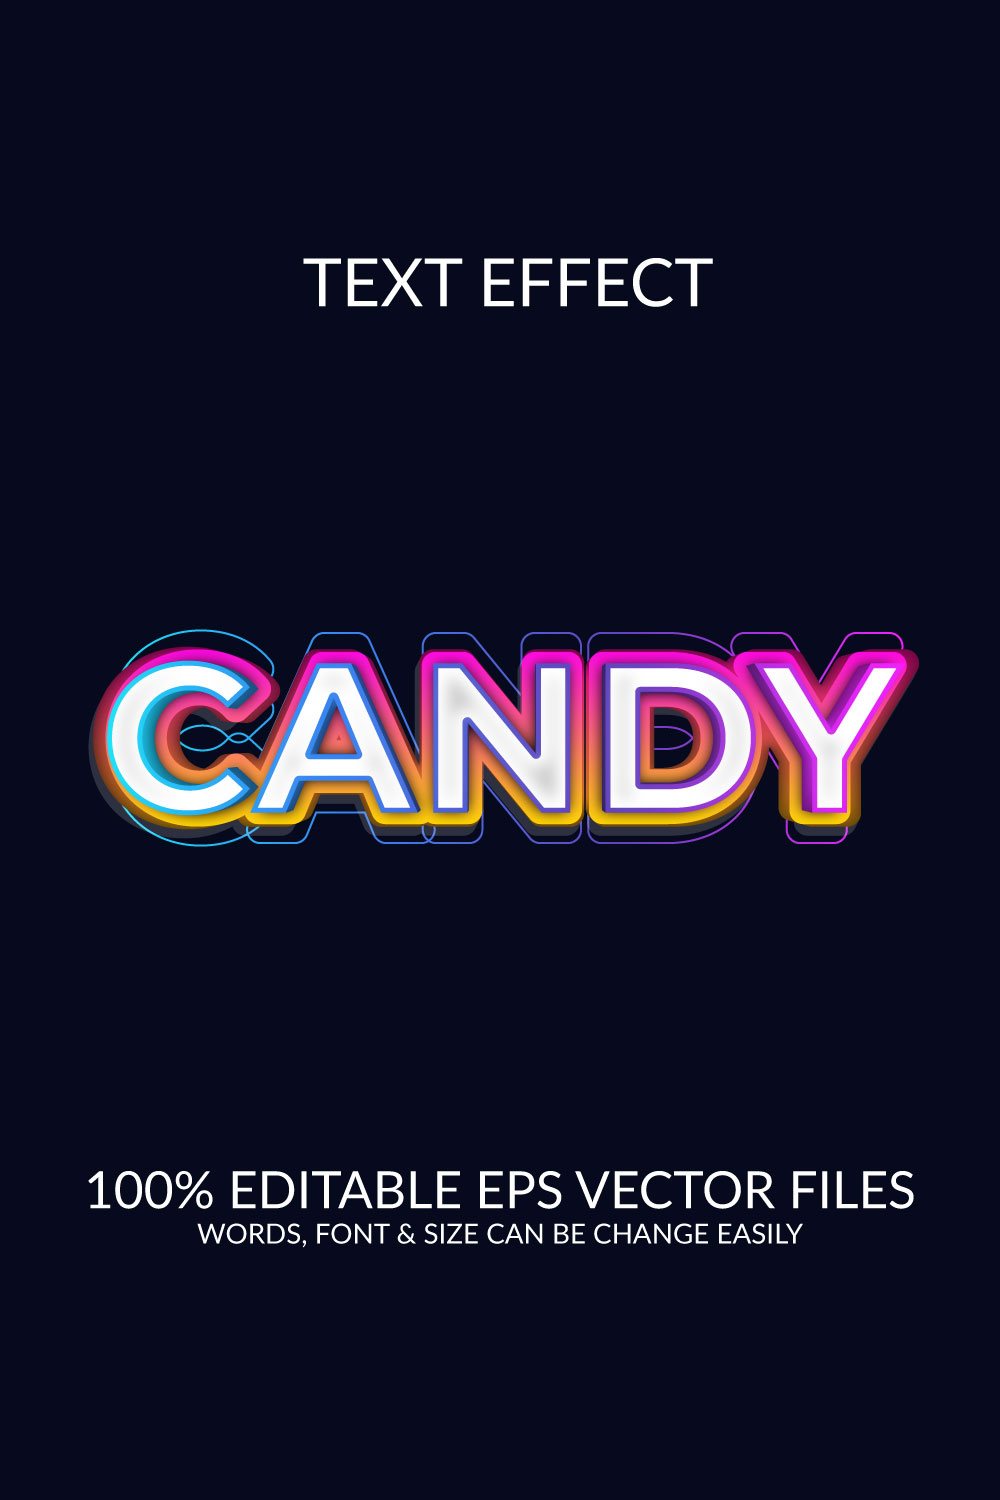 Candy 3d editable text effect template pinterest preview image.